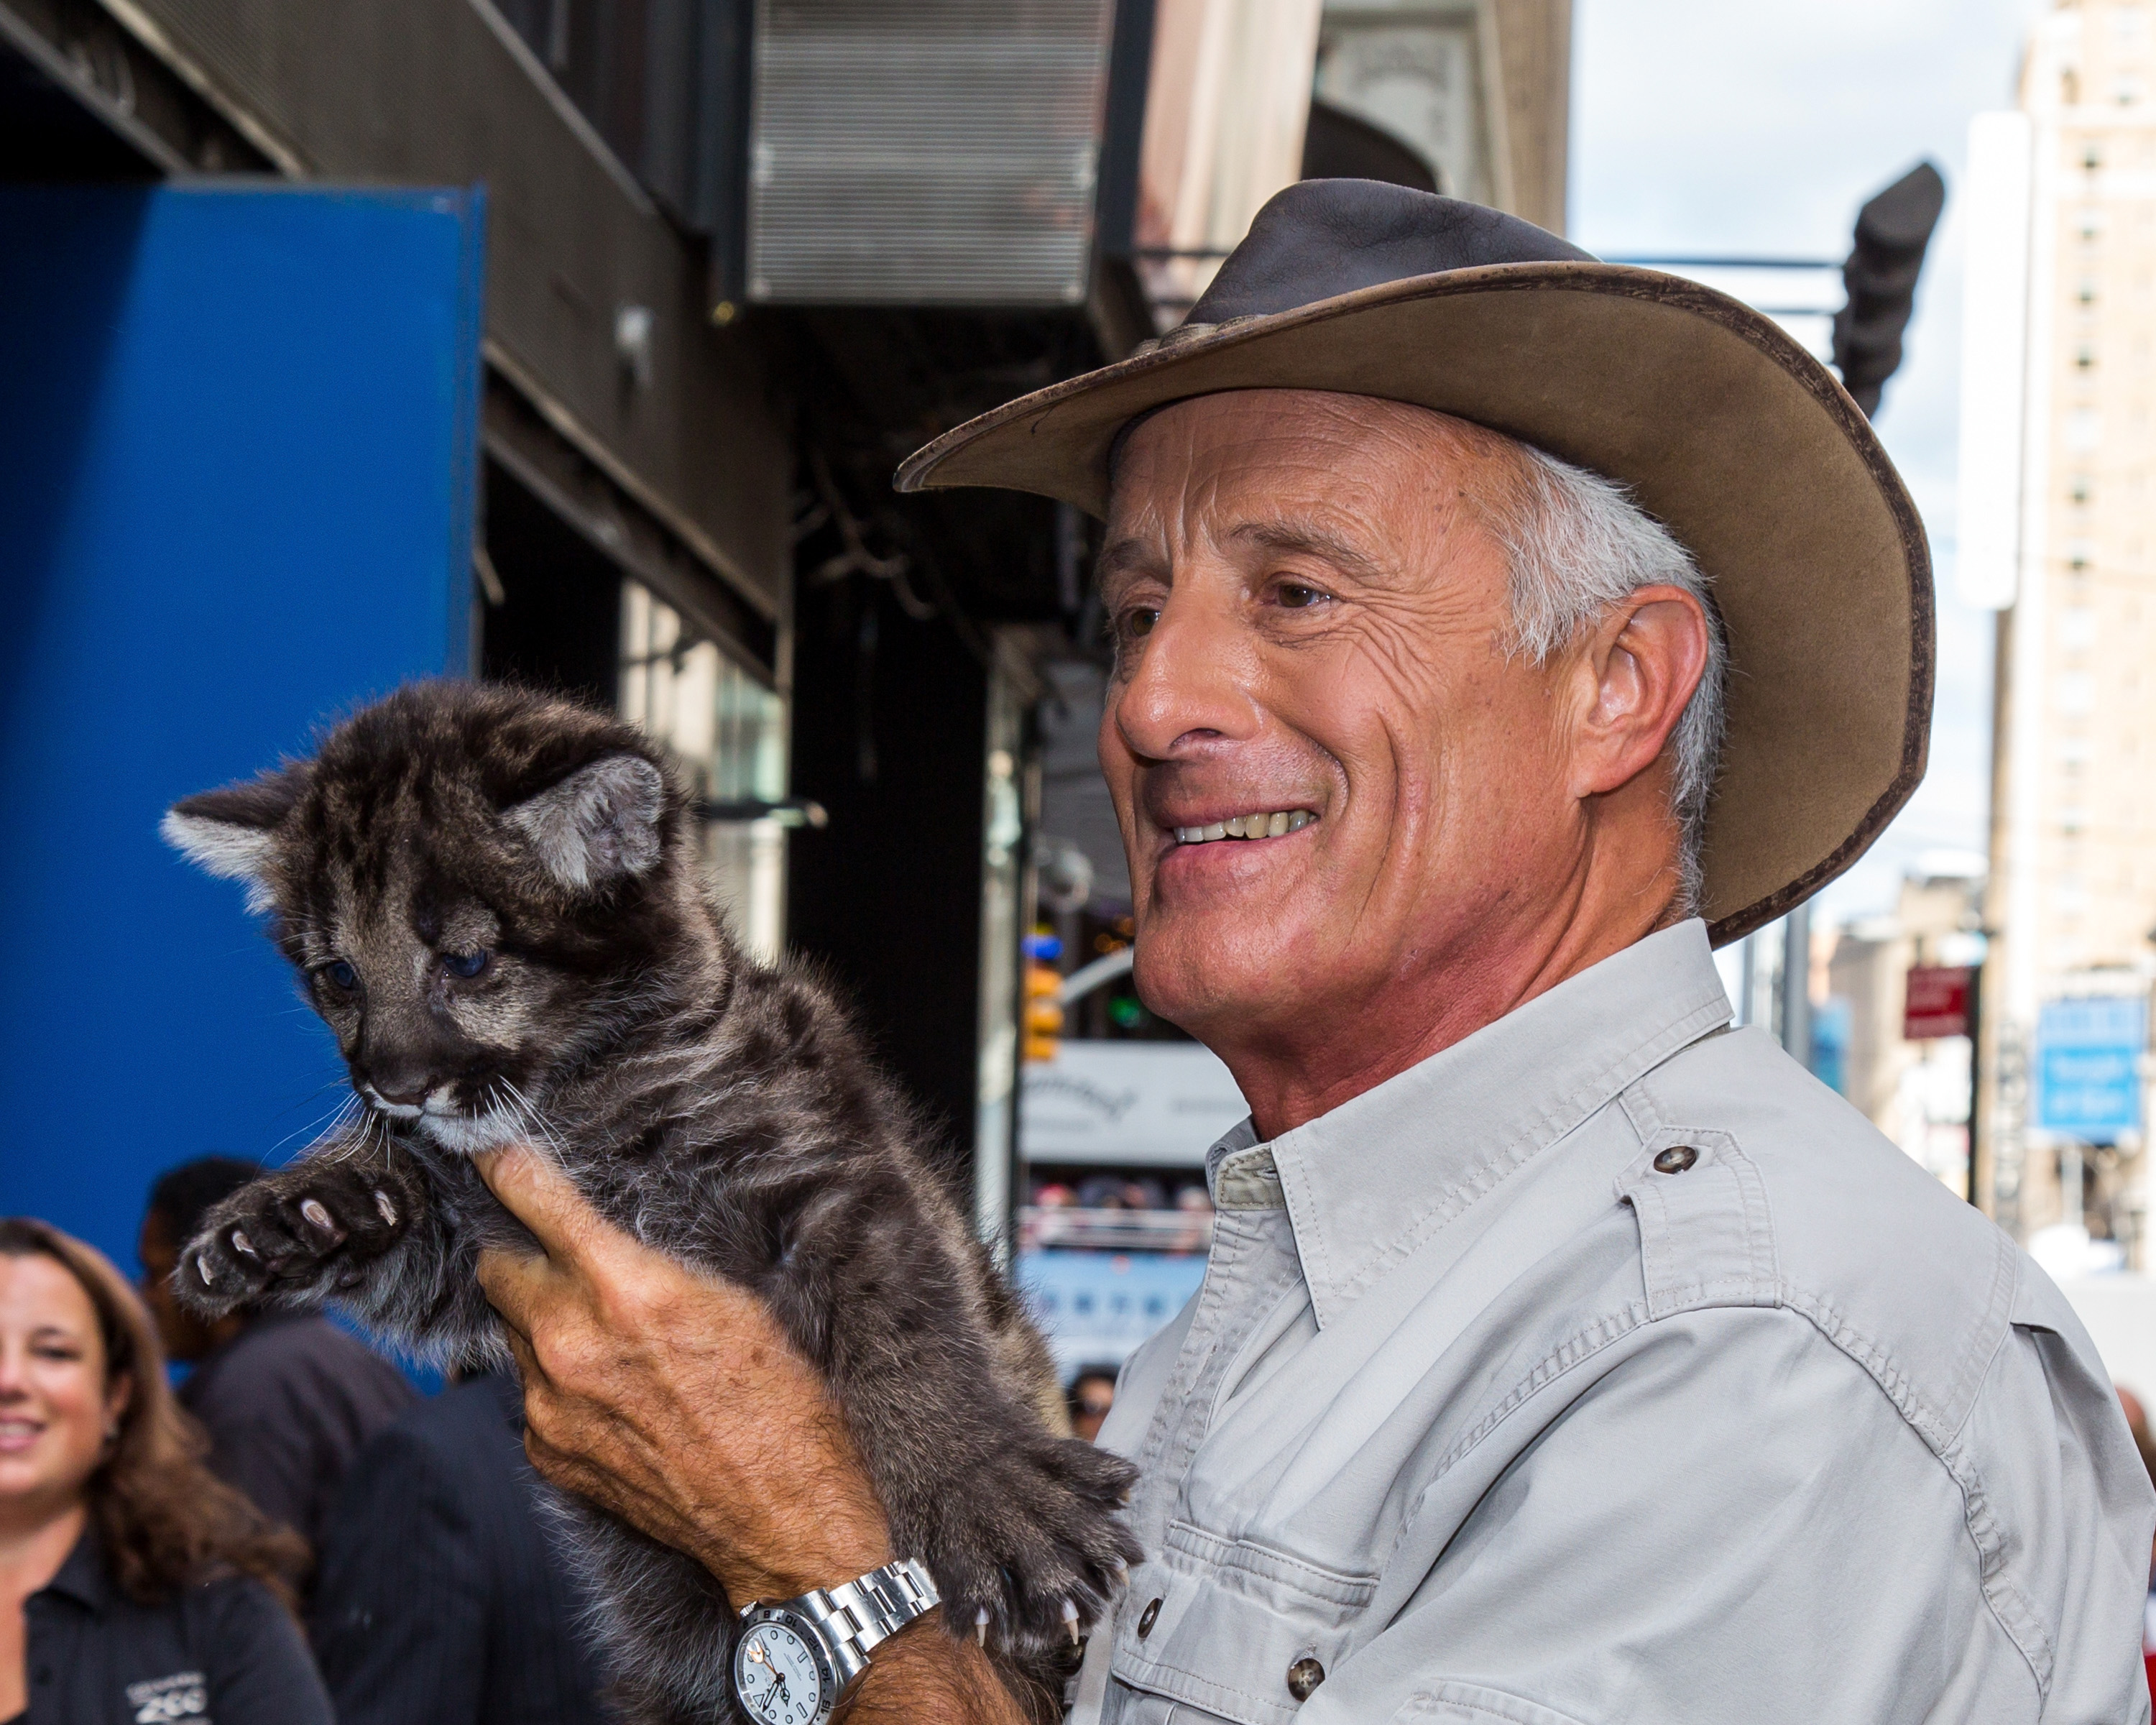 Jack Hanna is seen posing with black mountain lion cub at 'Good Morning America' on Sept. 22, 2014 in New York City. (Alessio Botticelli—GC Images)